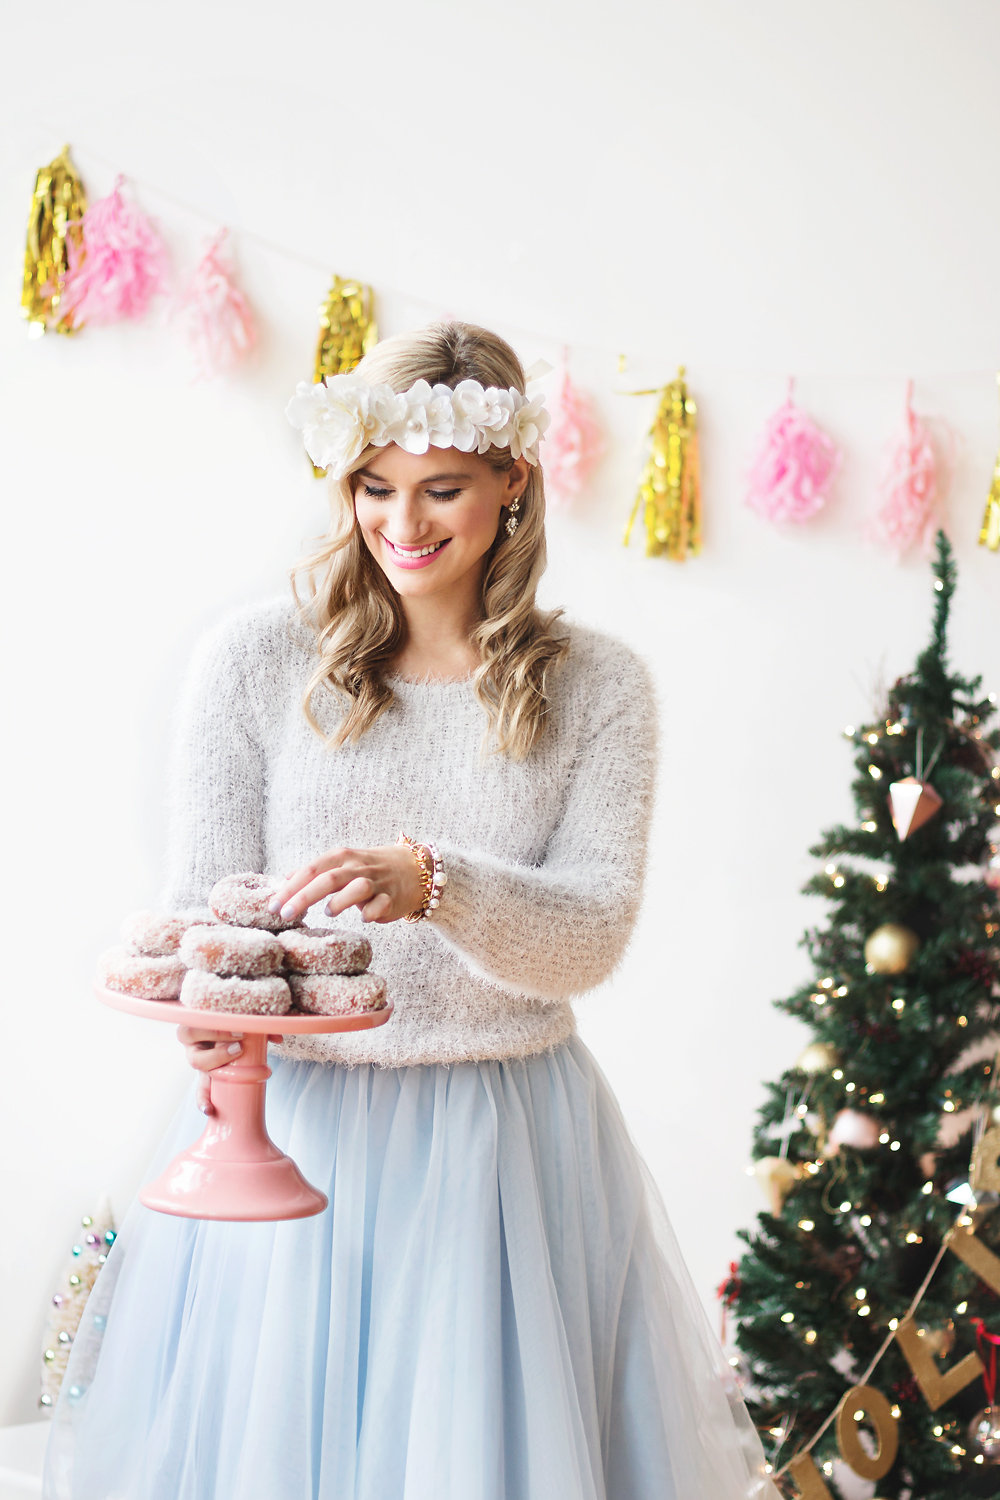 Cute tulle skirt and floral crowns for the holidays | Bijuleni